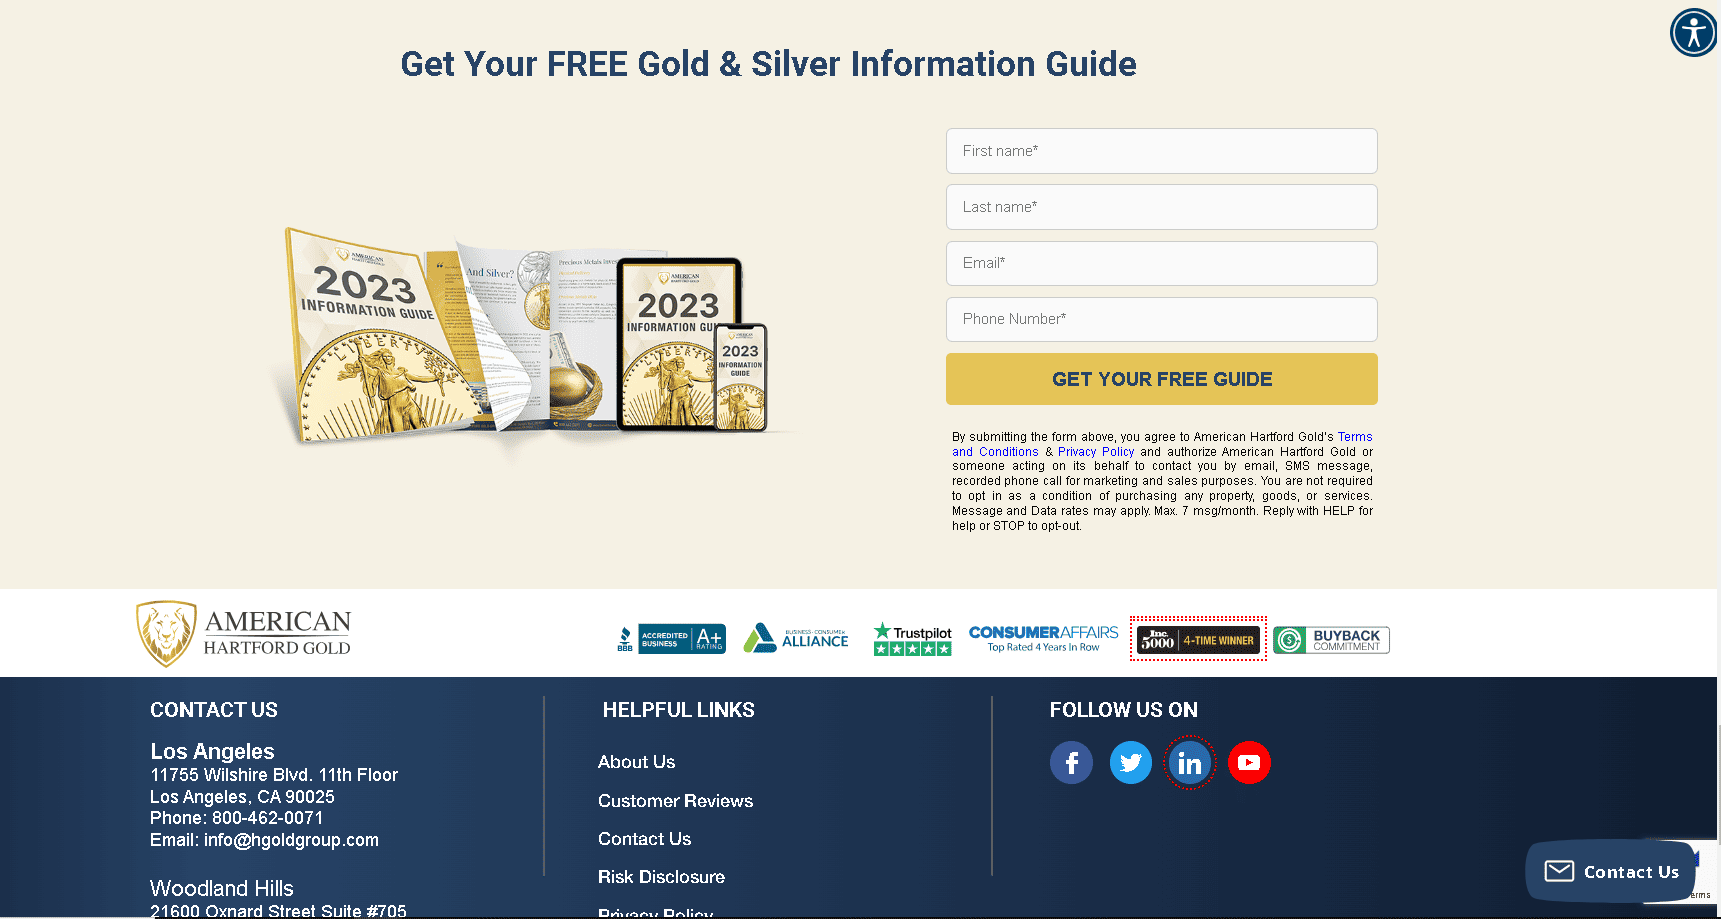 American Hartford Gold focuses on educating their customers about the pros and cons of investing in gold and silver